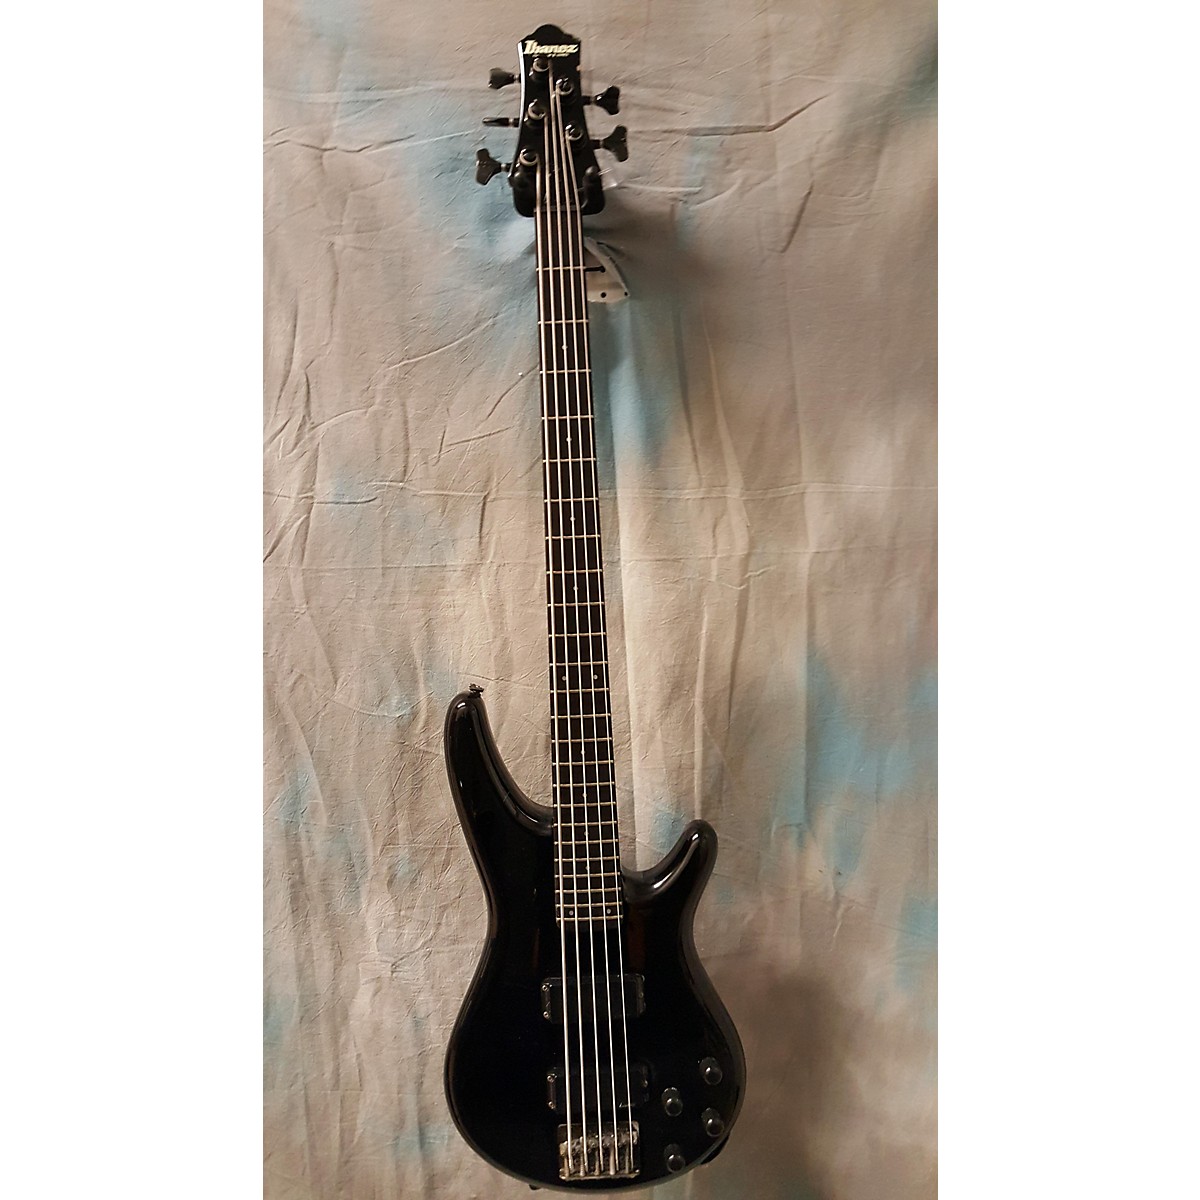 Ibanez RB885 Electric Bass Guitar Black 